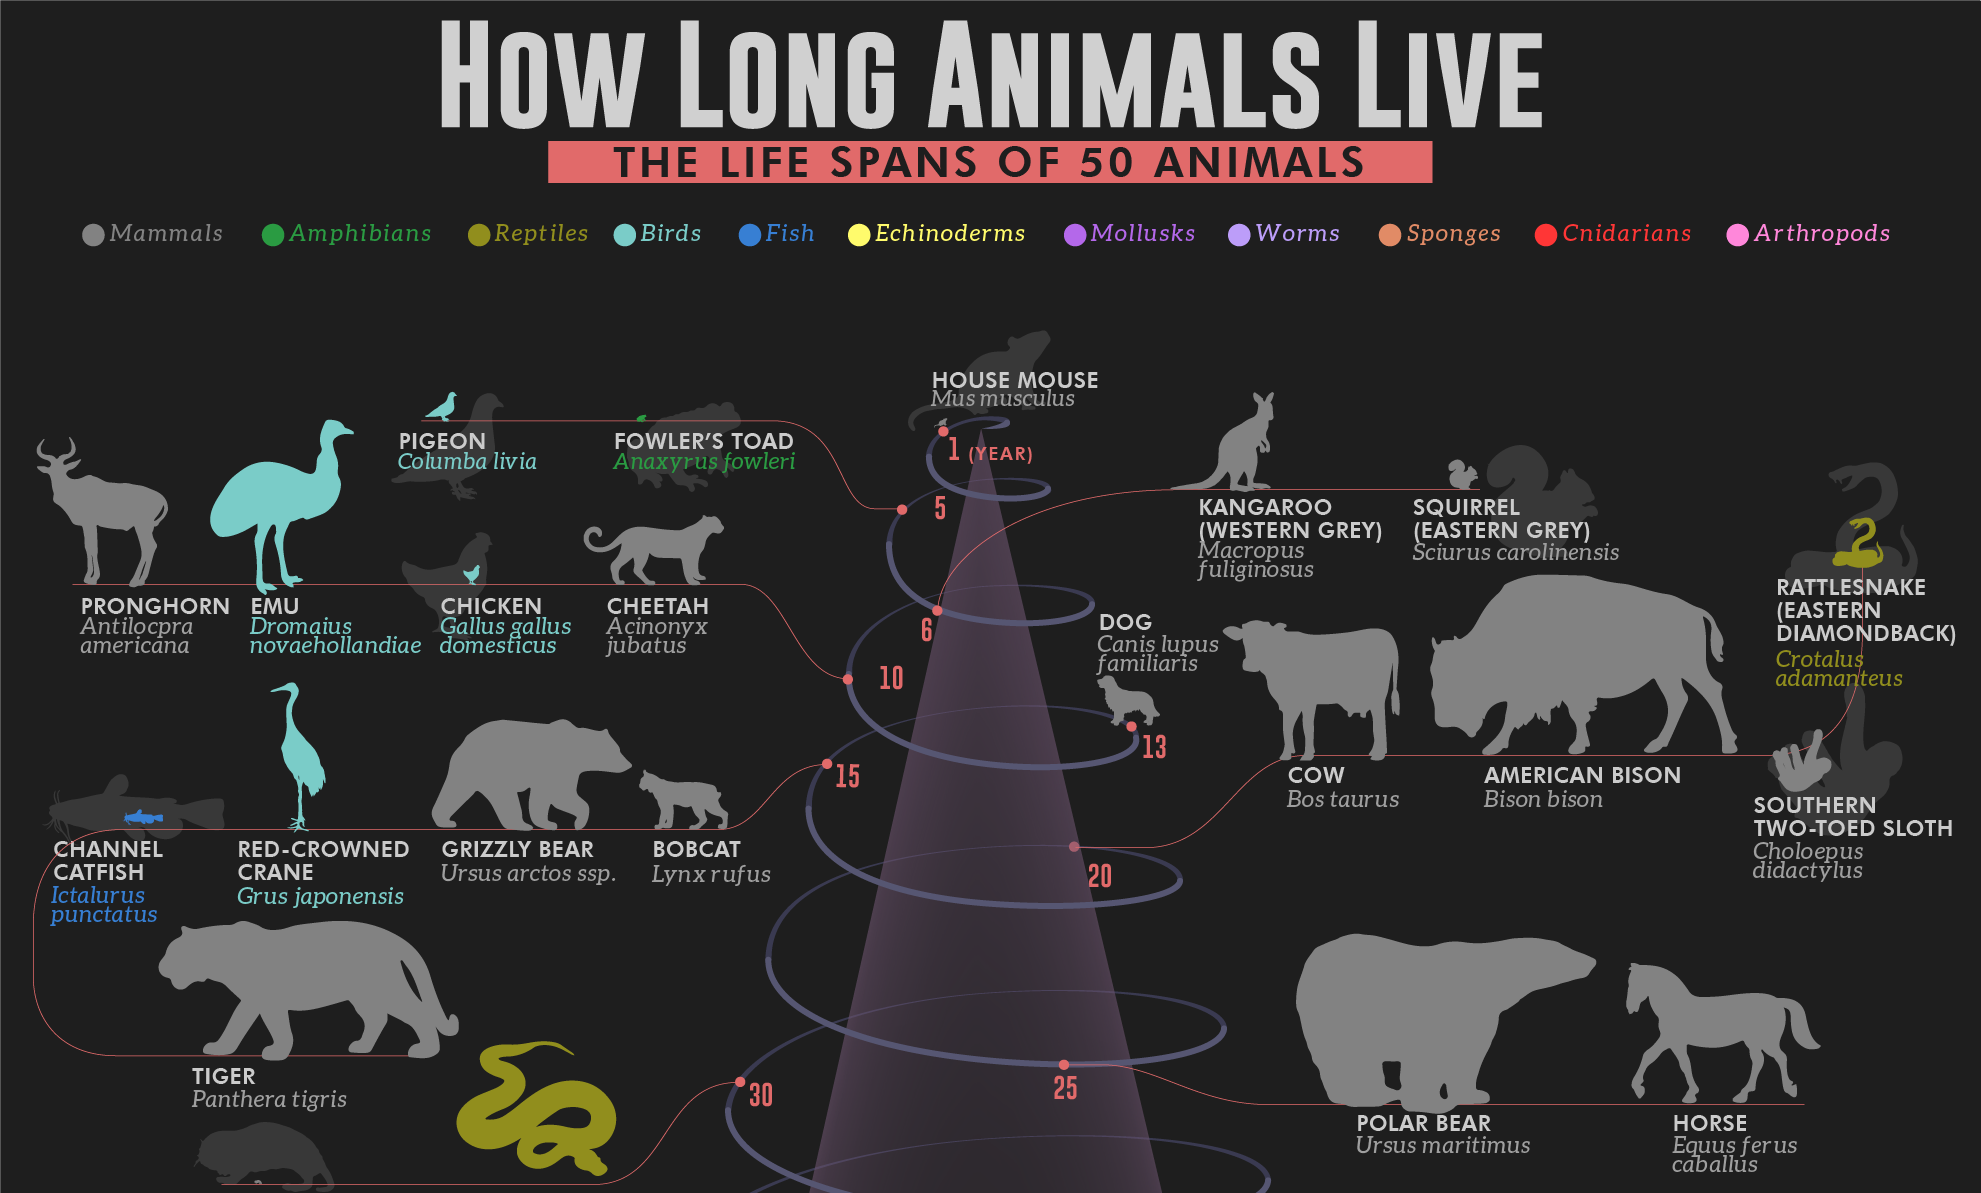 How Long Animals Live: The Life Spans of 50 Animals